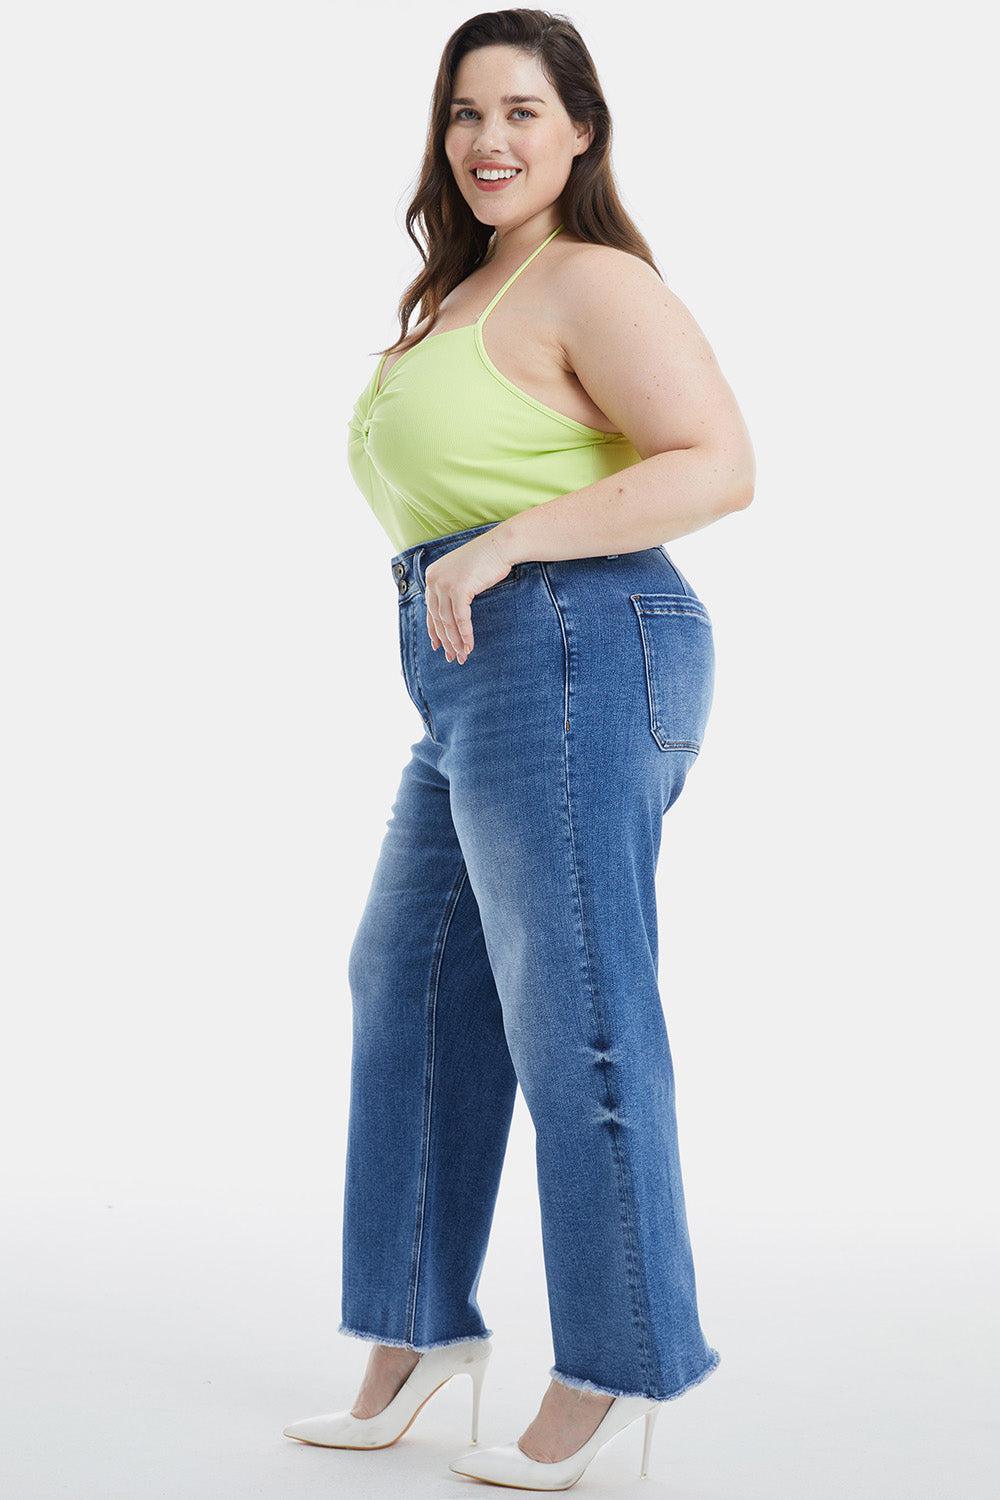 a woman in a yellow tank top and jeans